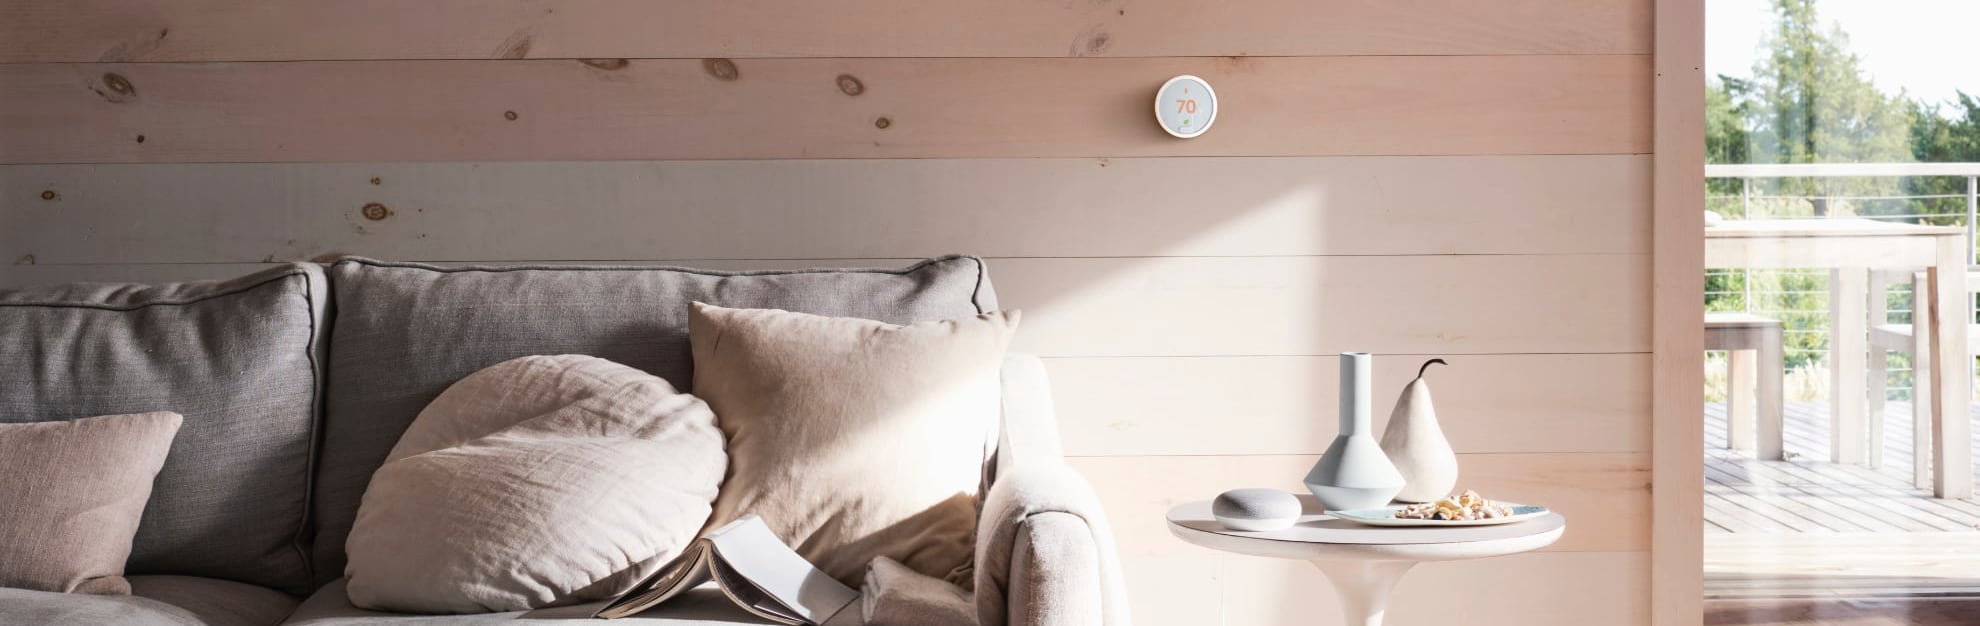 Vivint Home Automation in Brooklyn